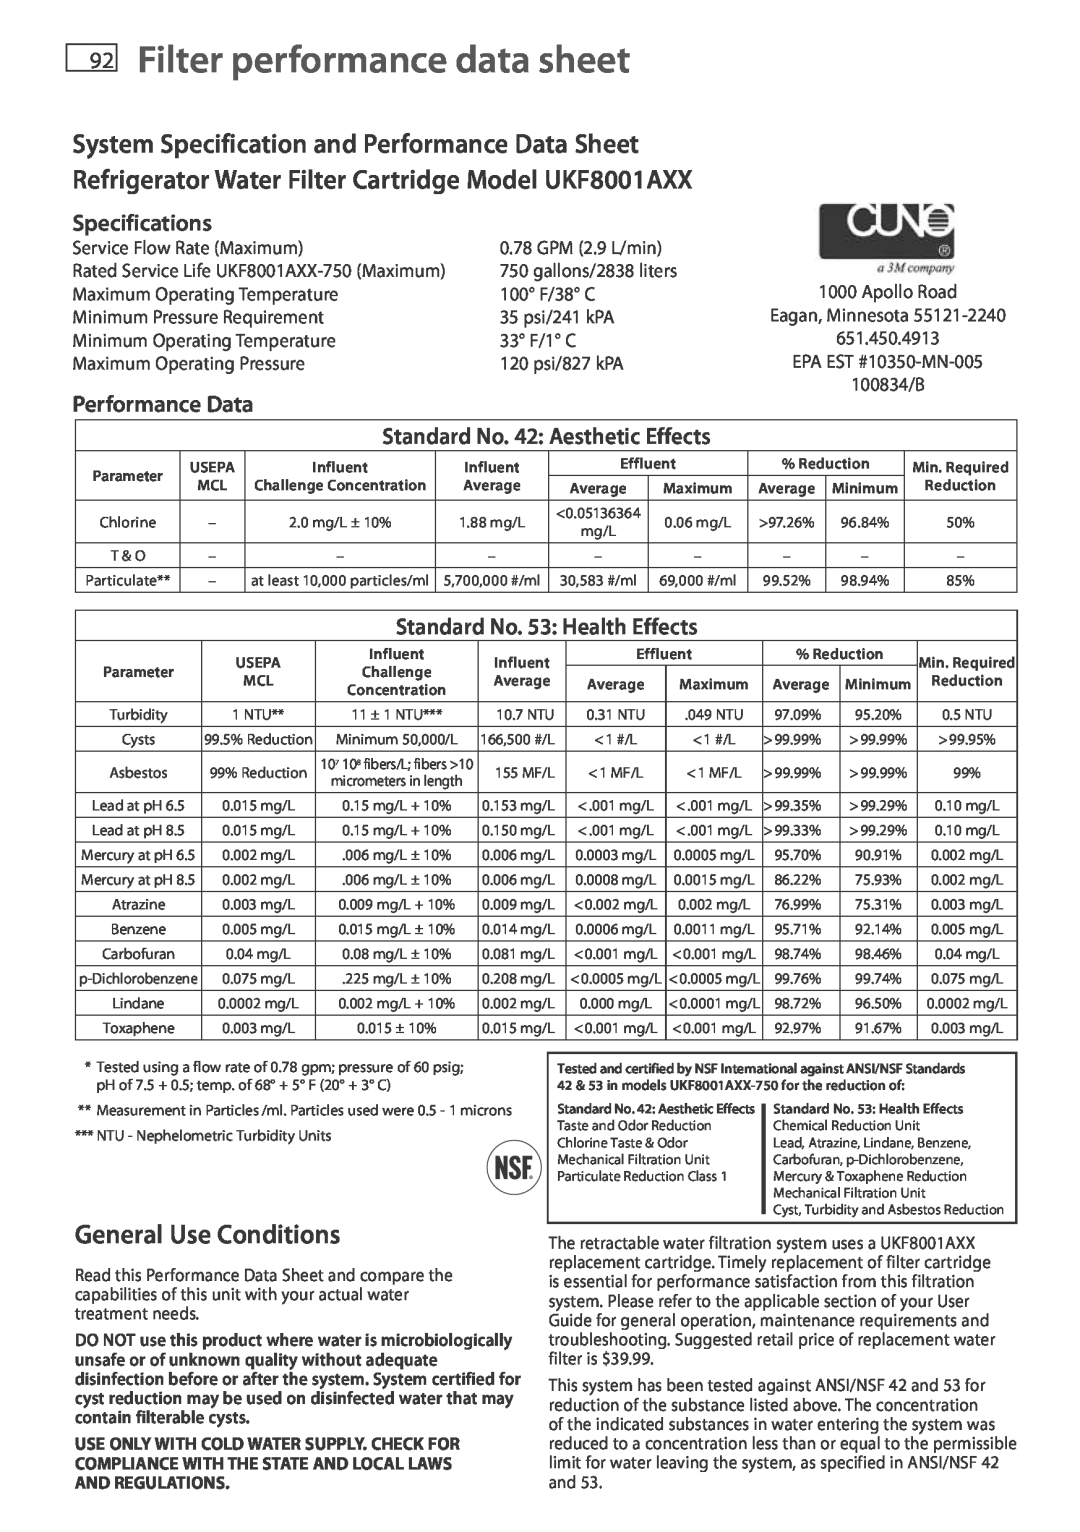 Fisher & Paykel RF175W 92Filter performance data sheet, System Specification and Performance Data Sheet, GPM 2.9 L/min 